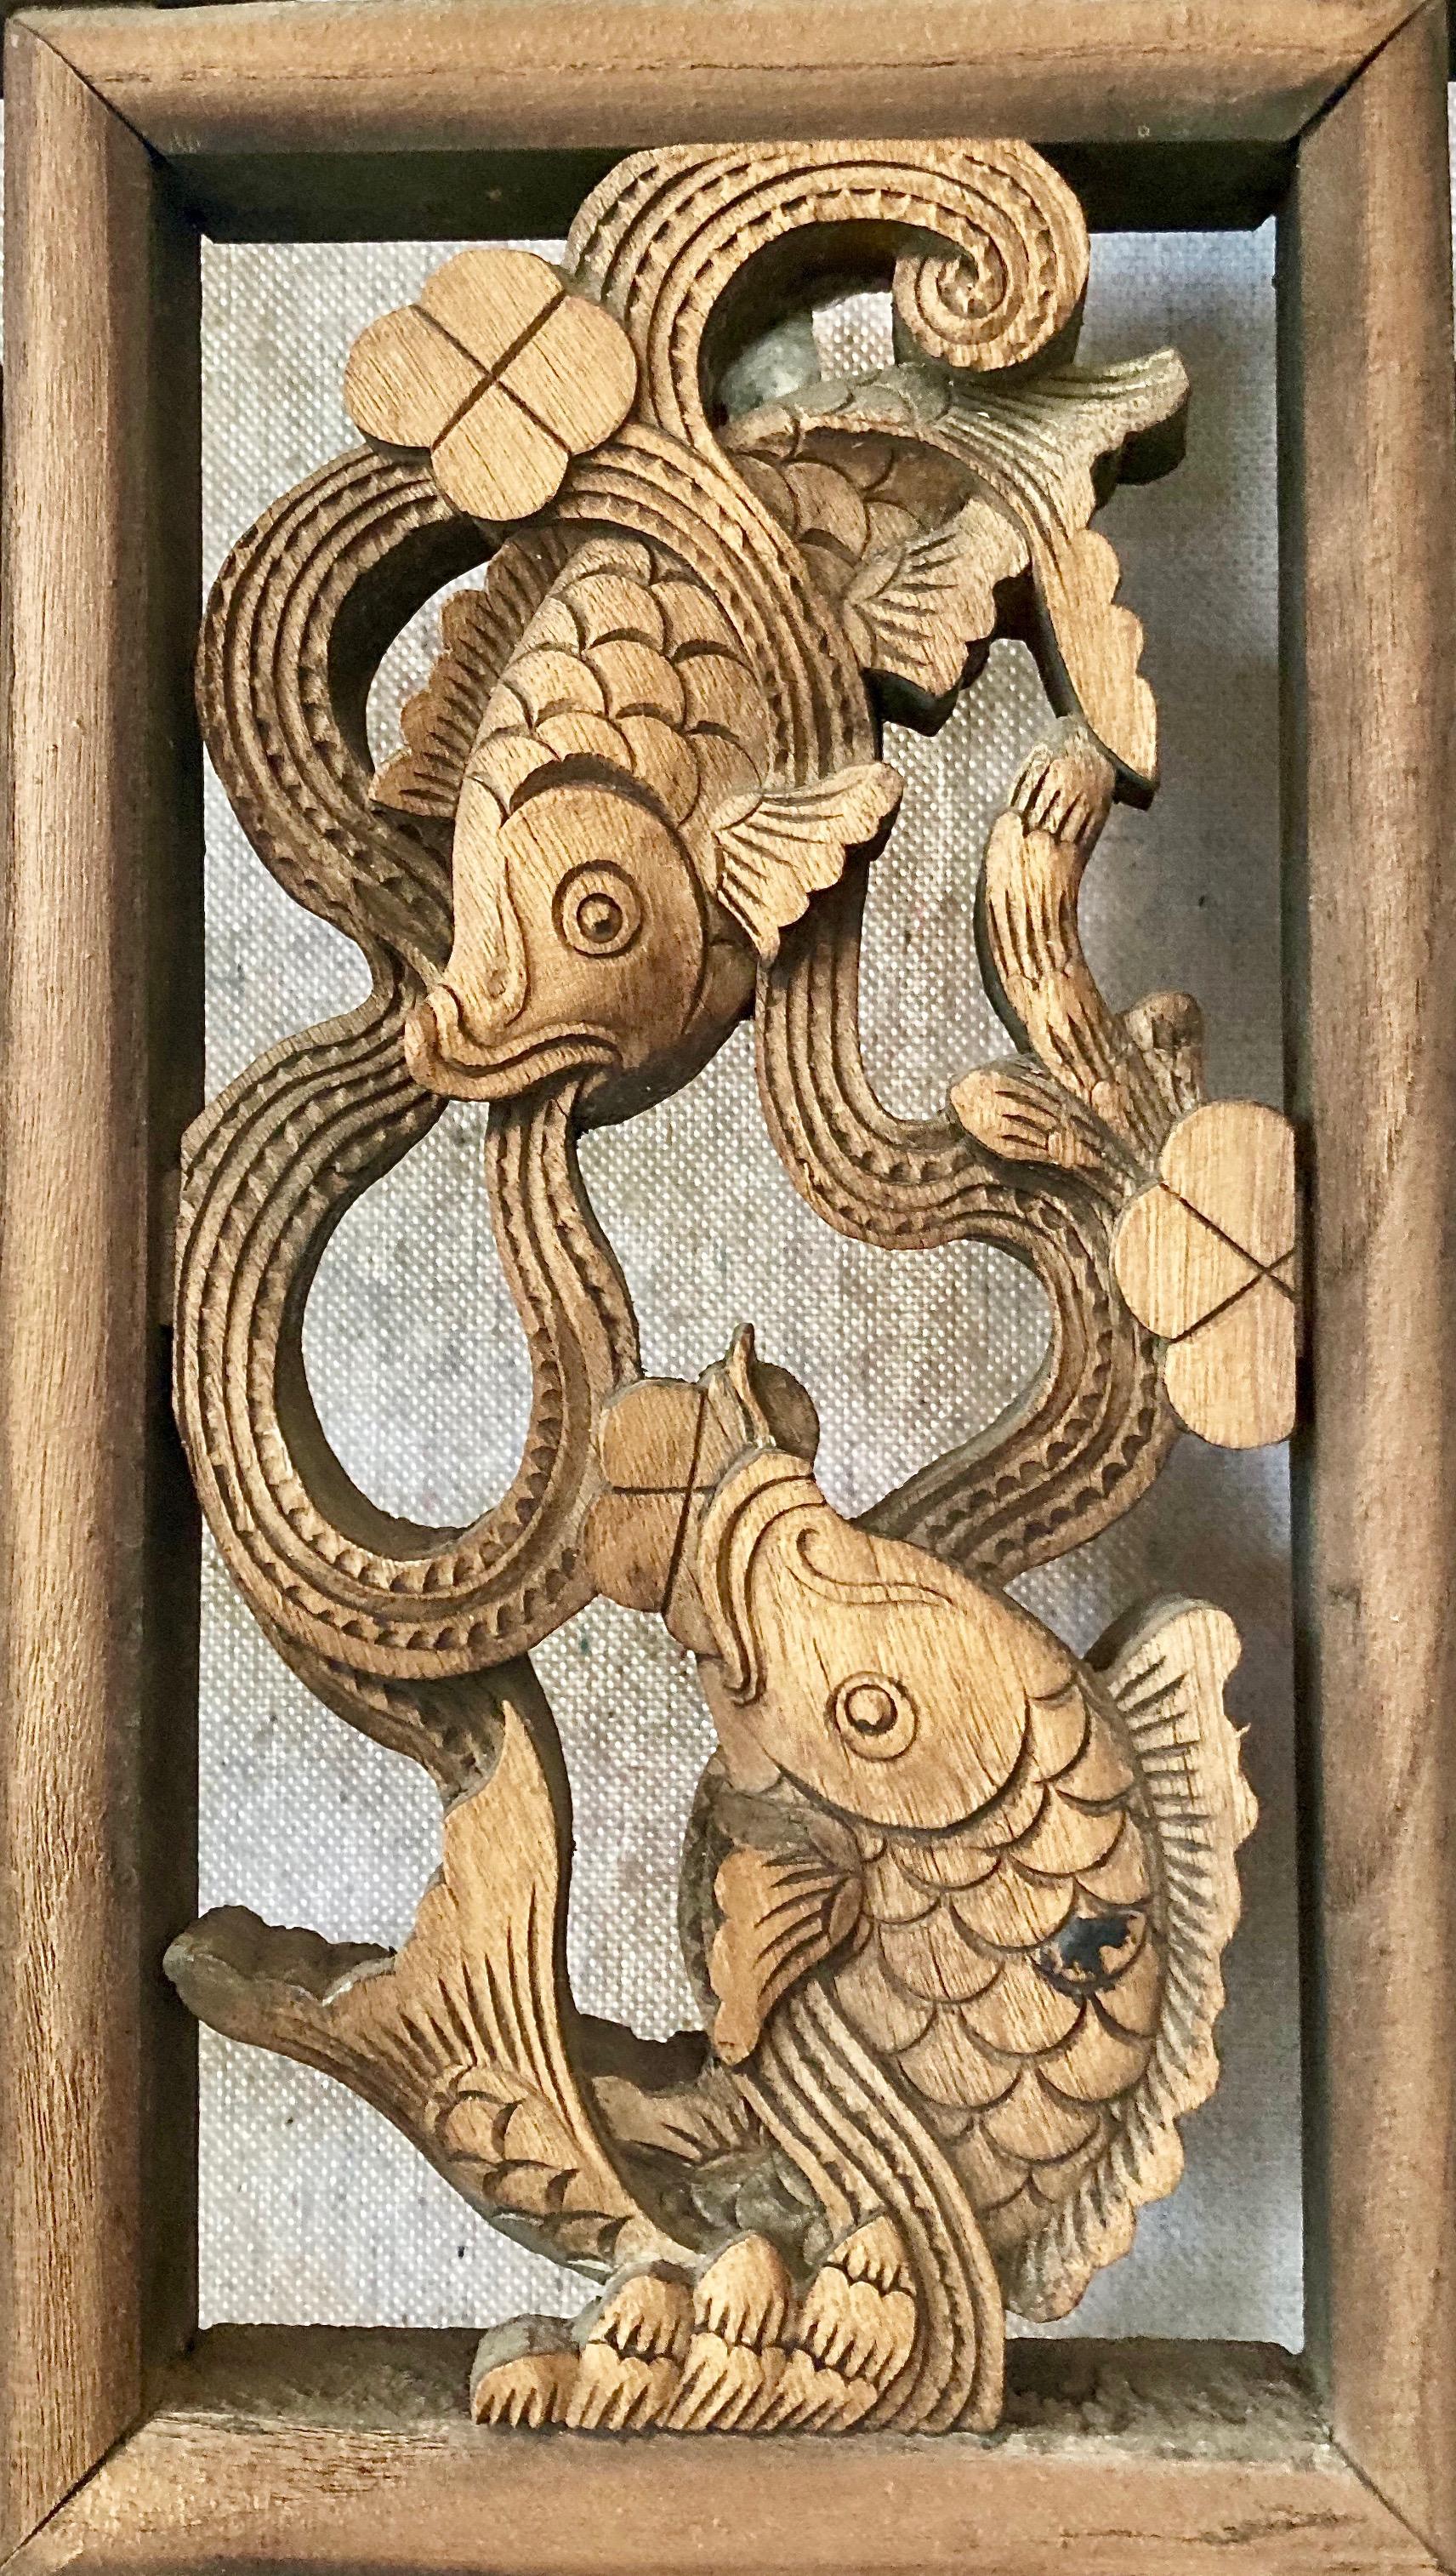 Heavy, thick framed three-pane panel includes openwork carving, relief carving + lattice work techniques. The rectangular center carving includes a pleasant fish motif. The lower pane features personage sharing a drink.